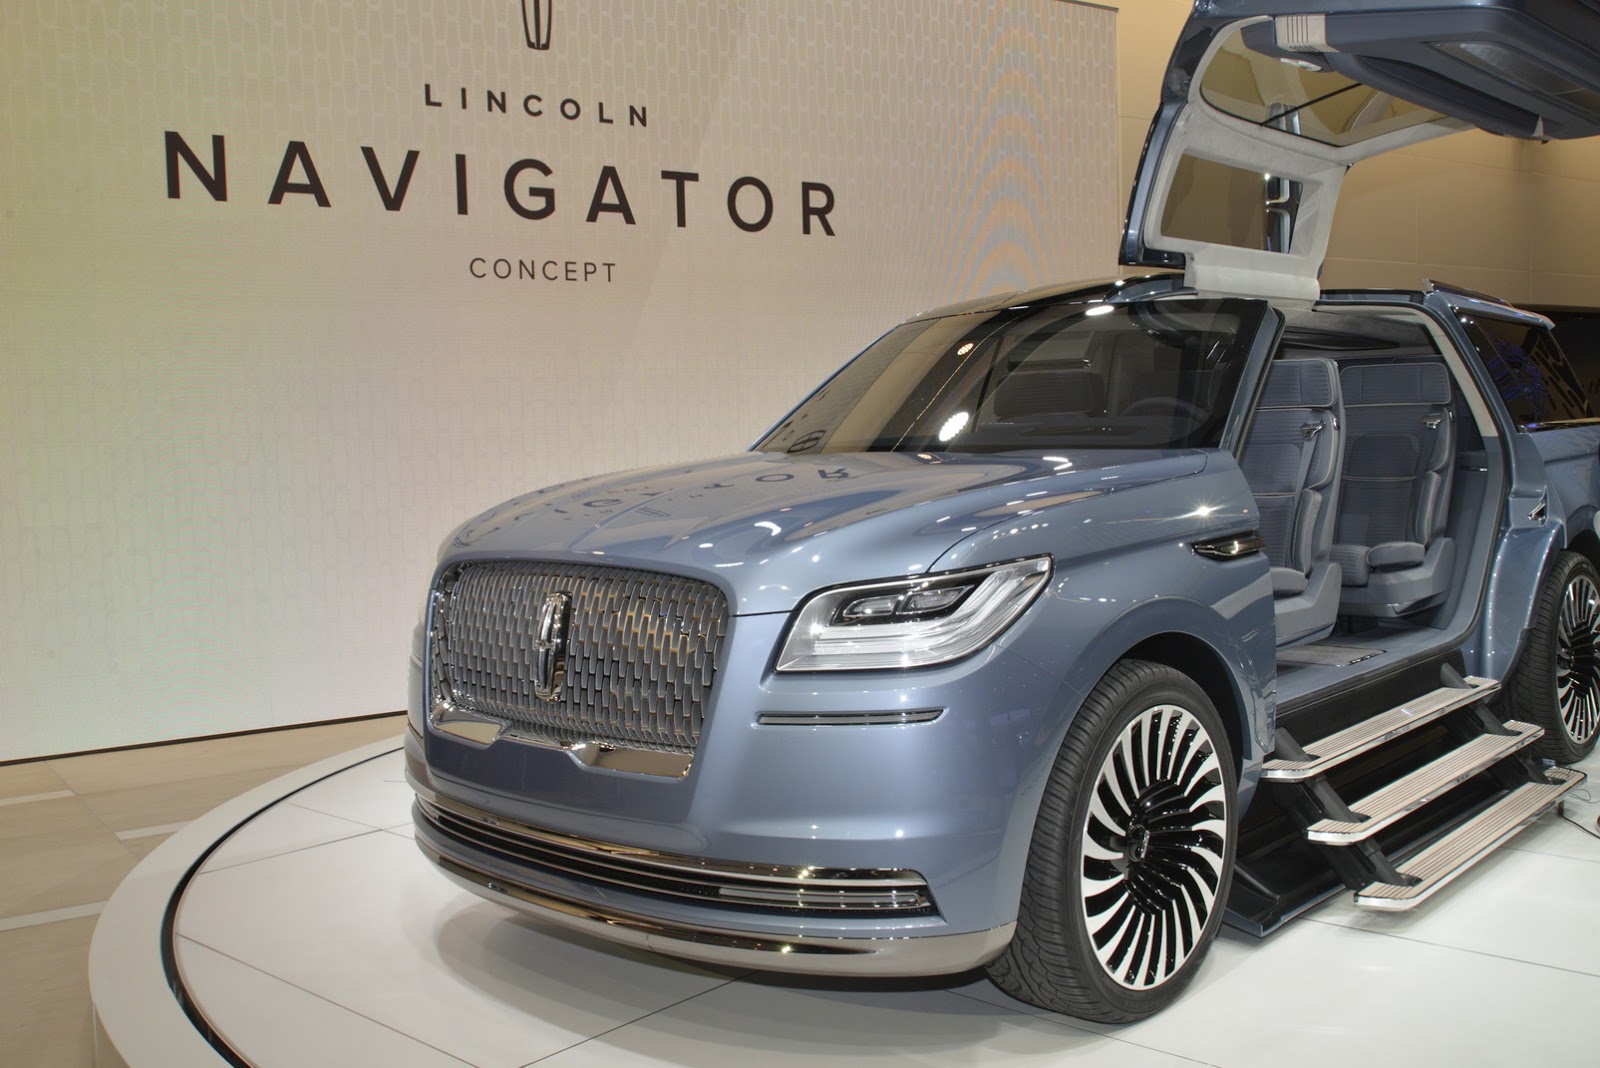 Lincoln Navigator Concept Brings Future ‘Bling’ To NY | Carscoops